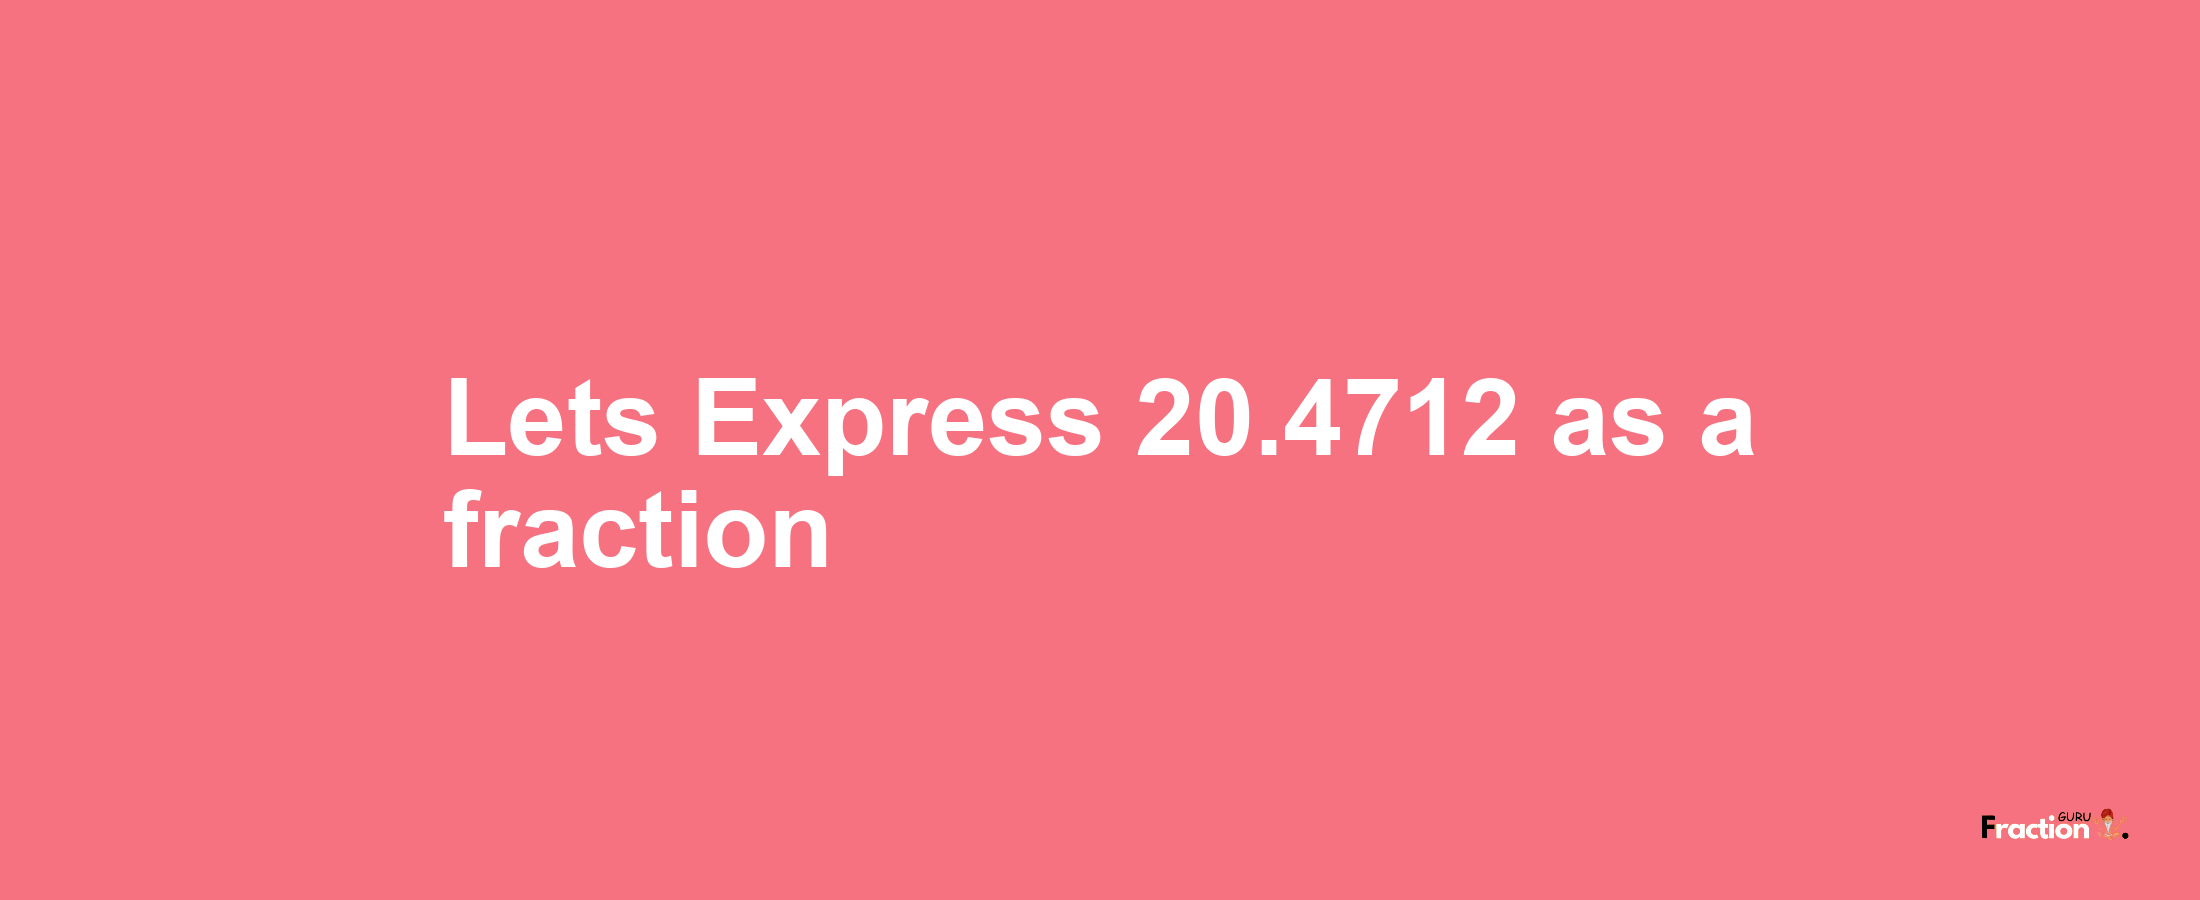 Lets Express 20.4712 as afraction